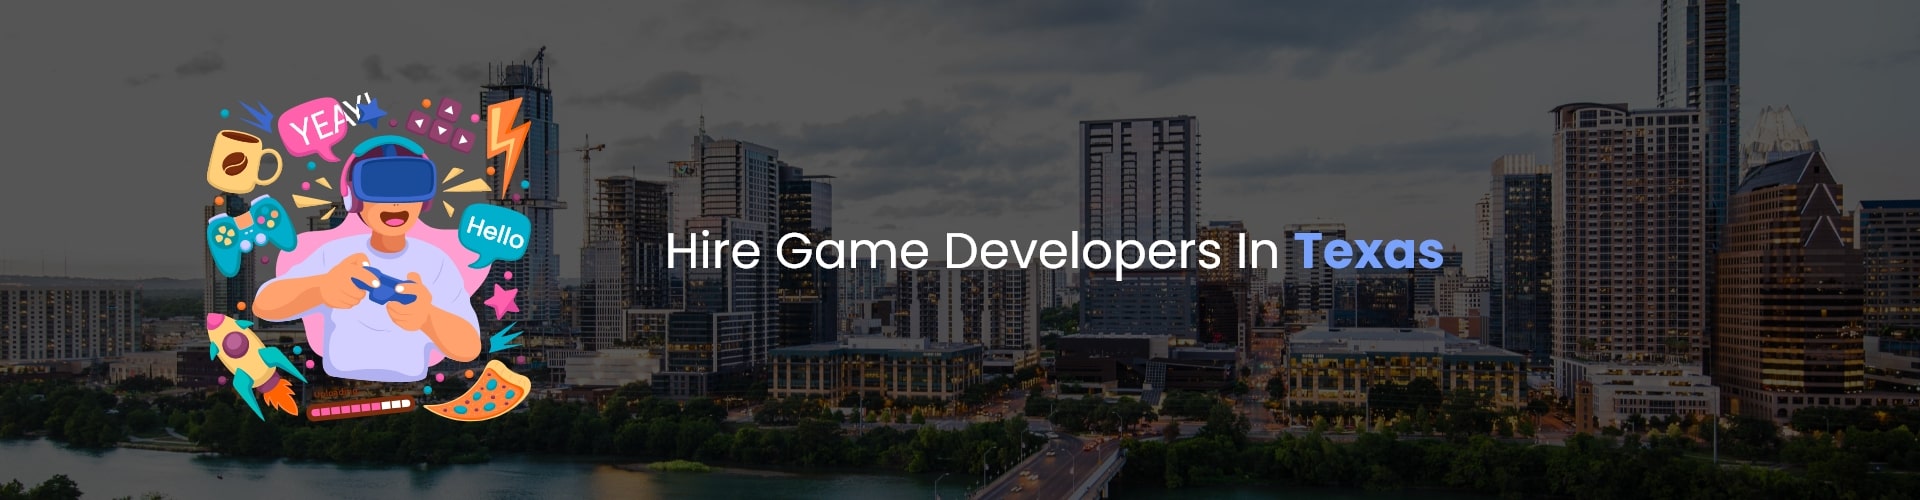 hire game developers in texas